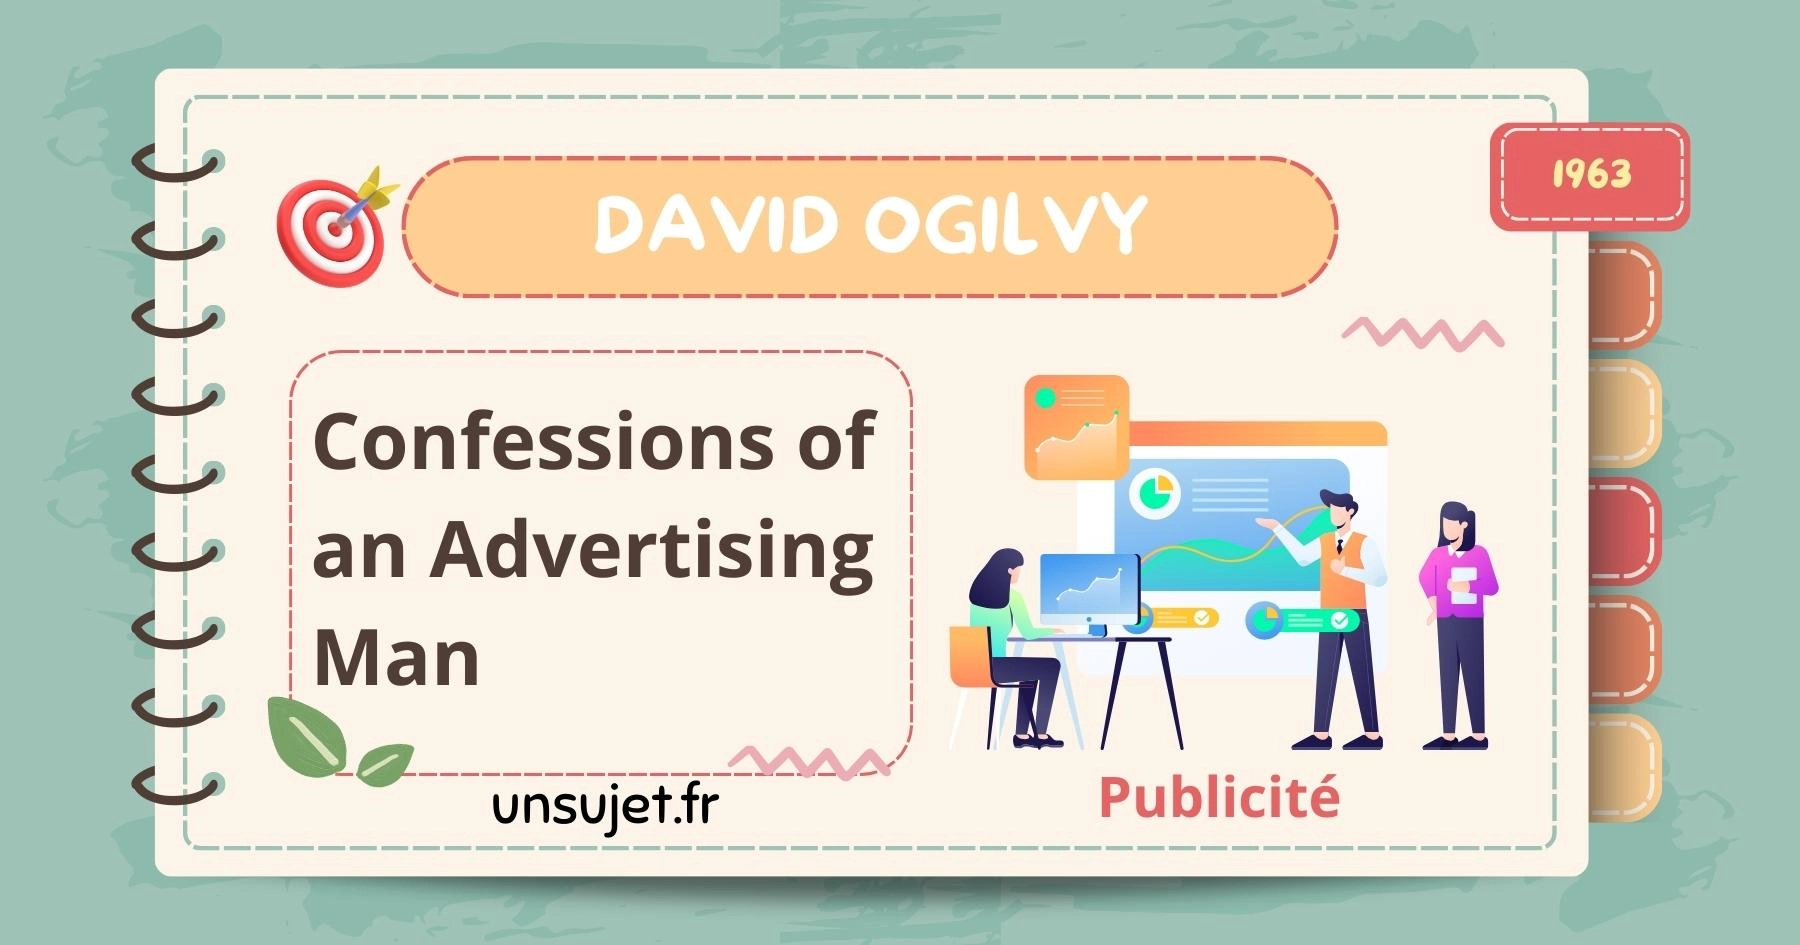 Confessions of an Advertising Man